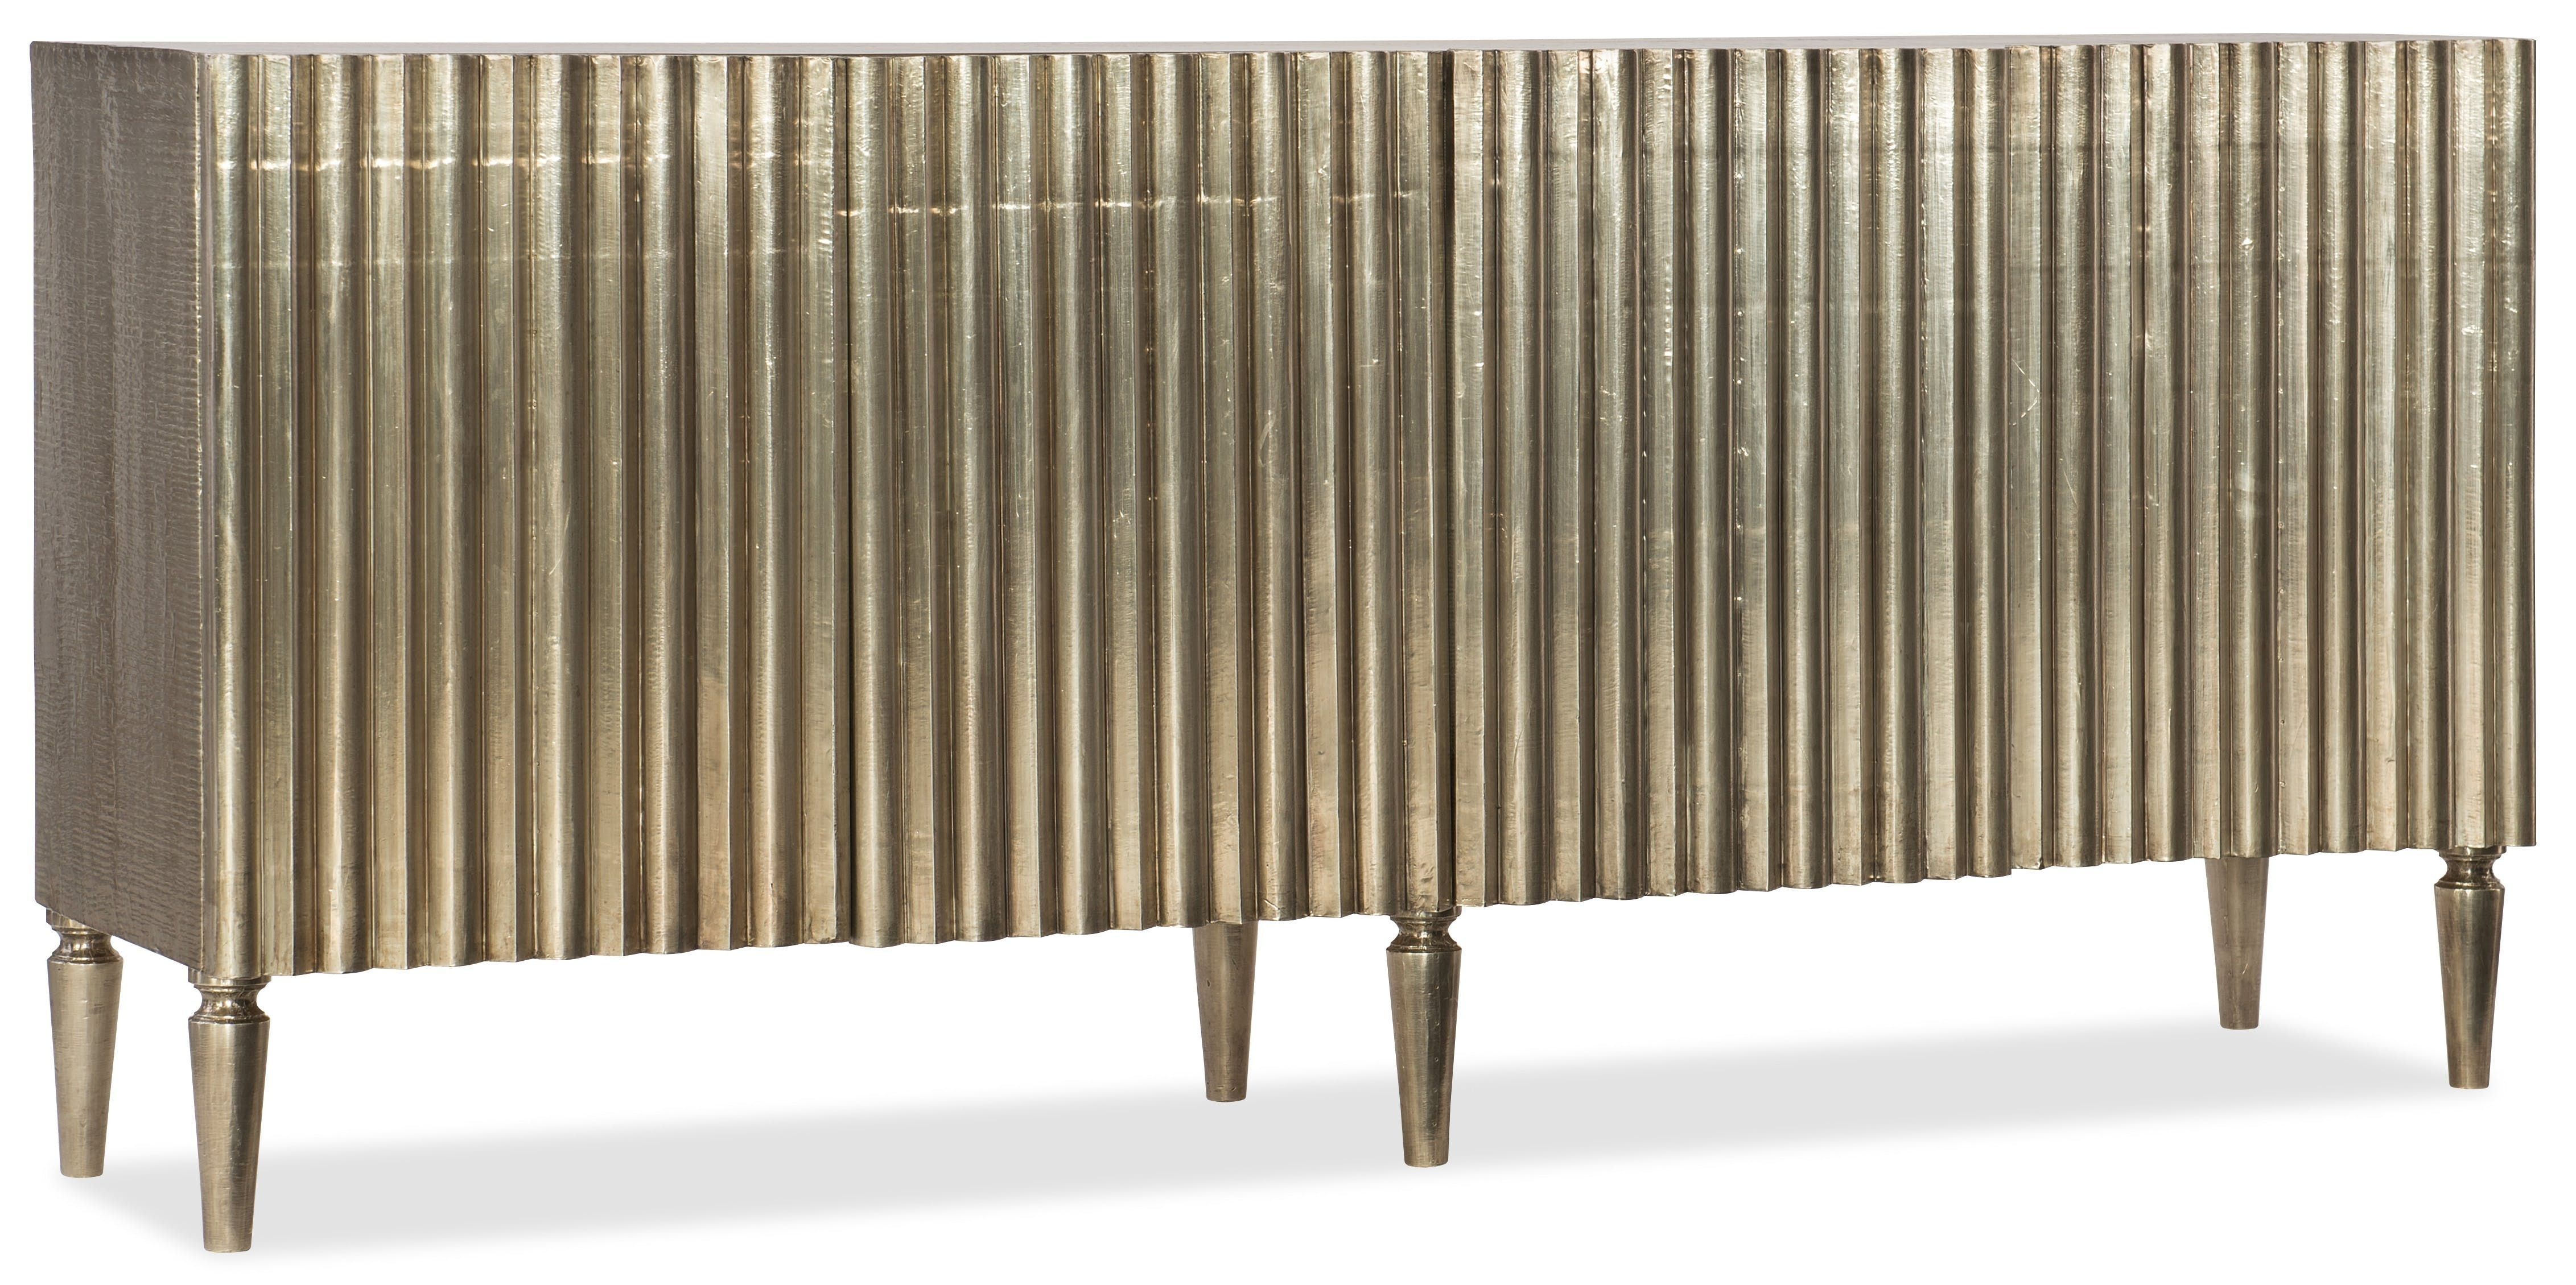 Looking For The Perfect Piece Of Jewelry For Your Room? Look No Intended For Latest Gunmetal Perforated Brass Sideboards (View 10 of 20)